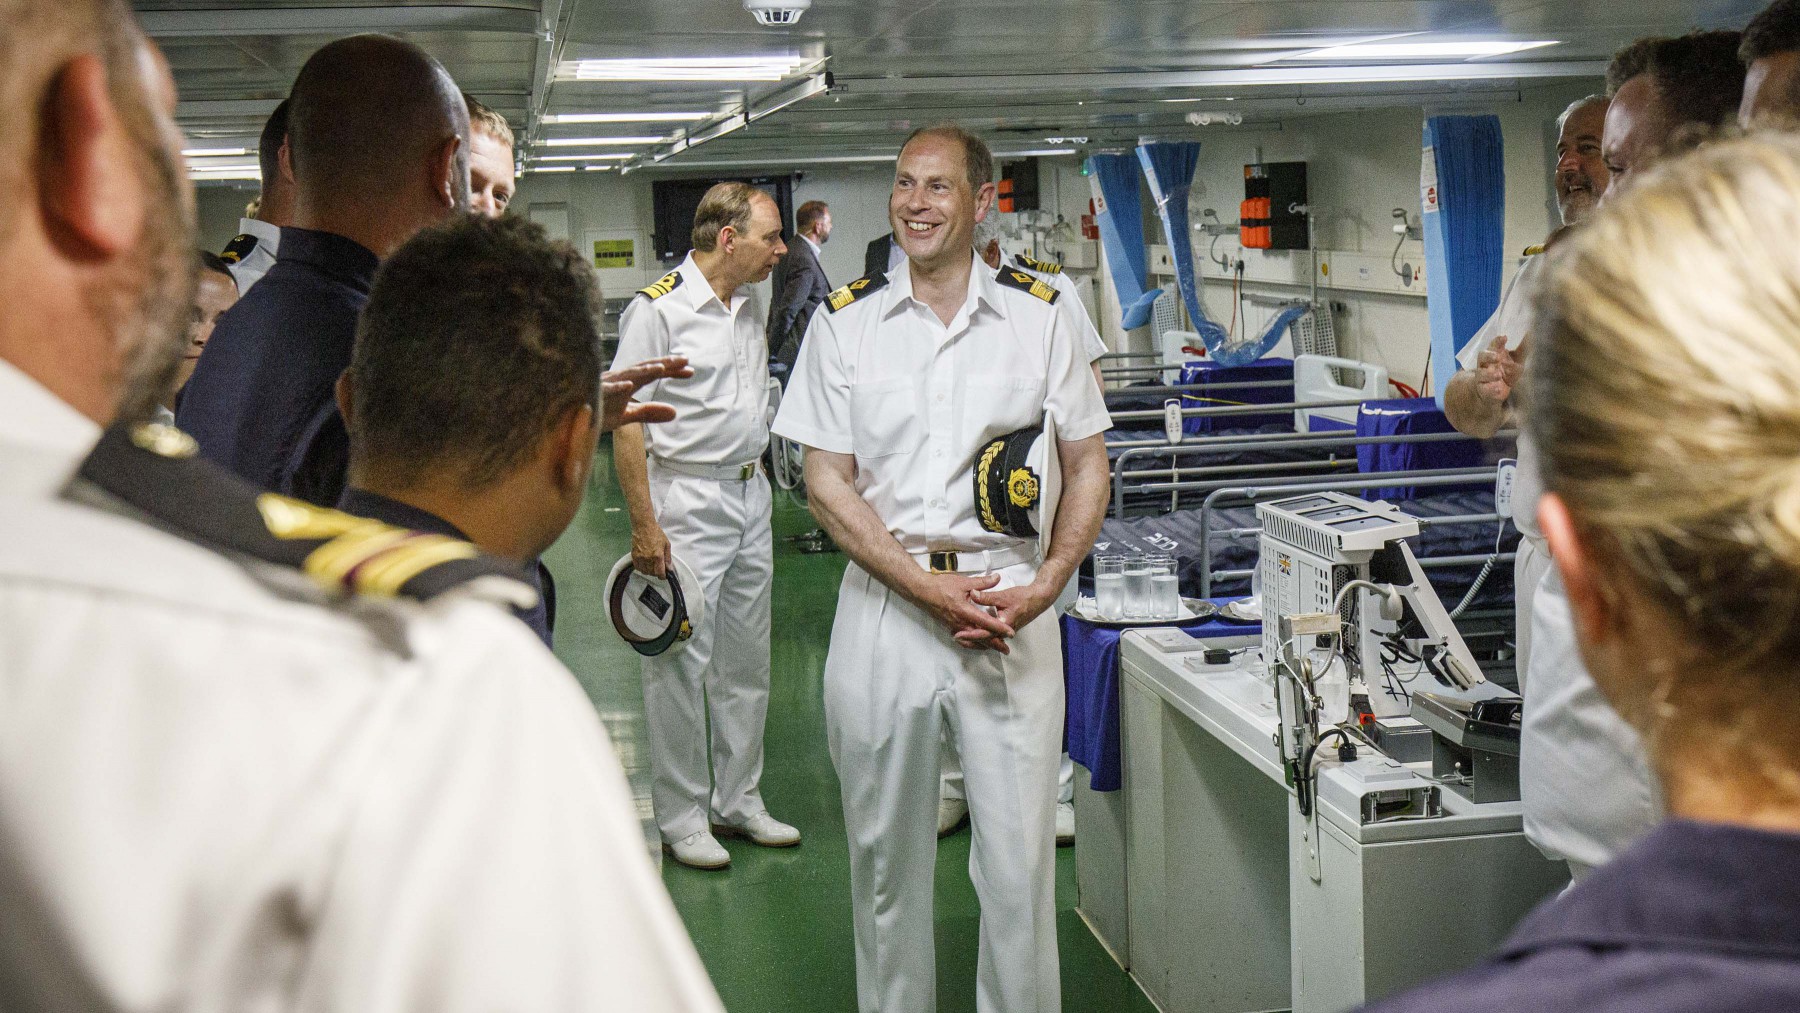 THE EARL OF WESSEX VISITS HER MAJESTY’S NAVAL BASE